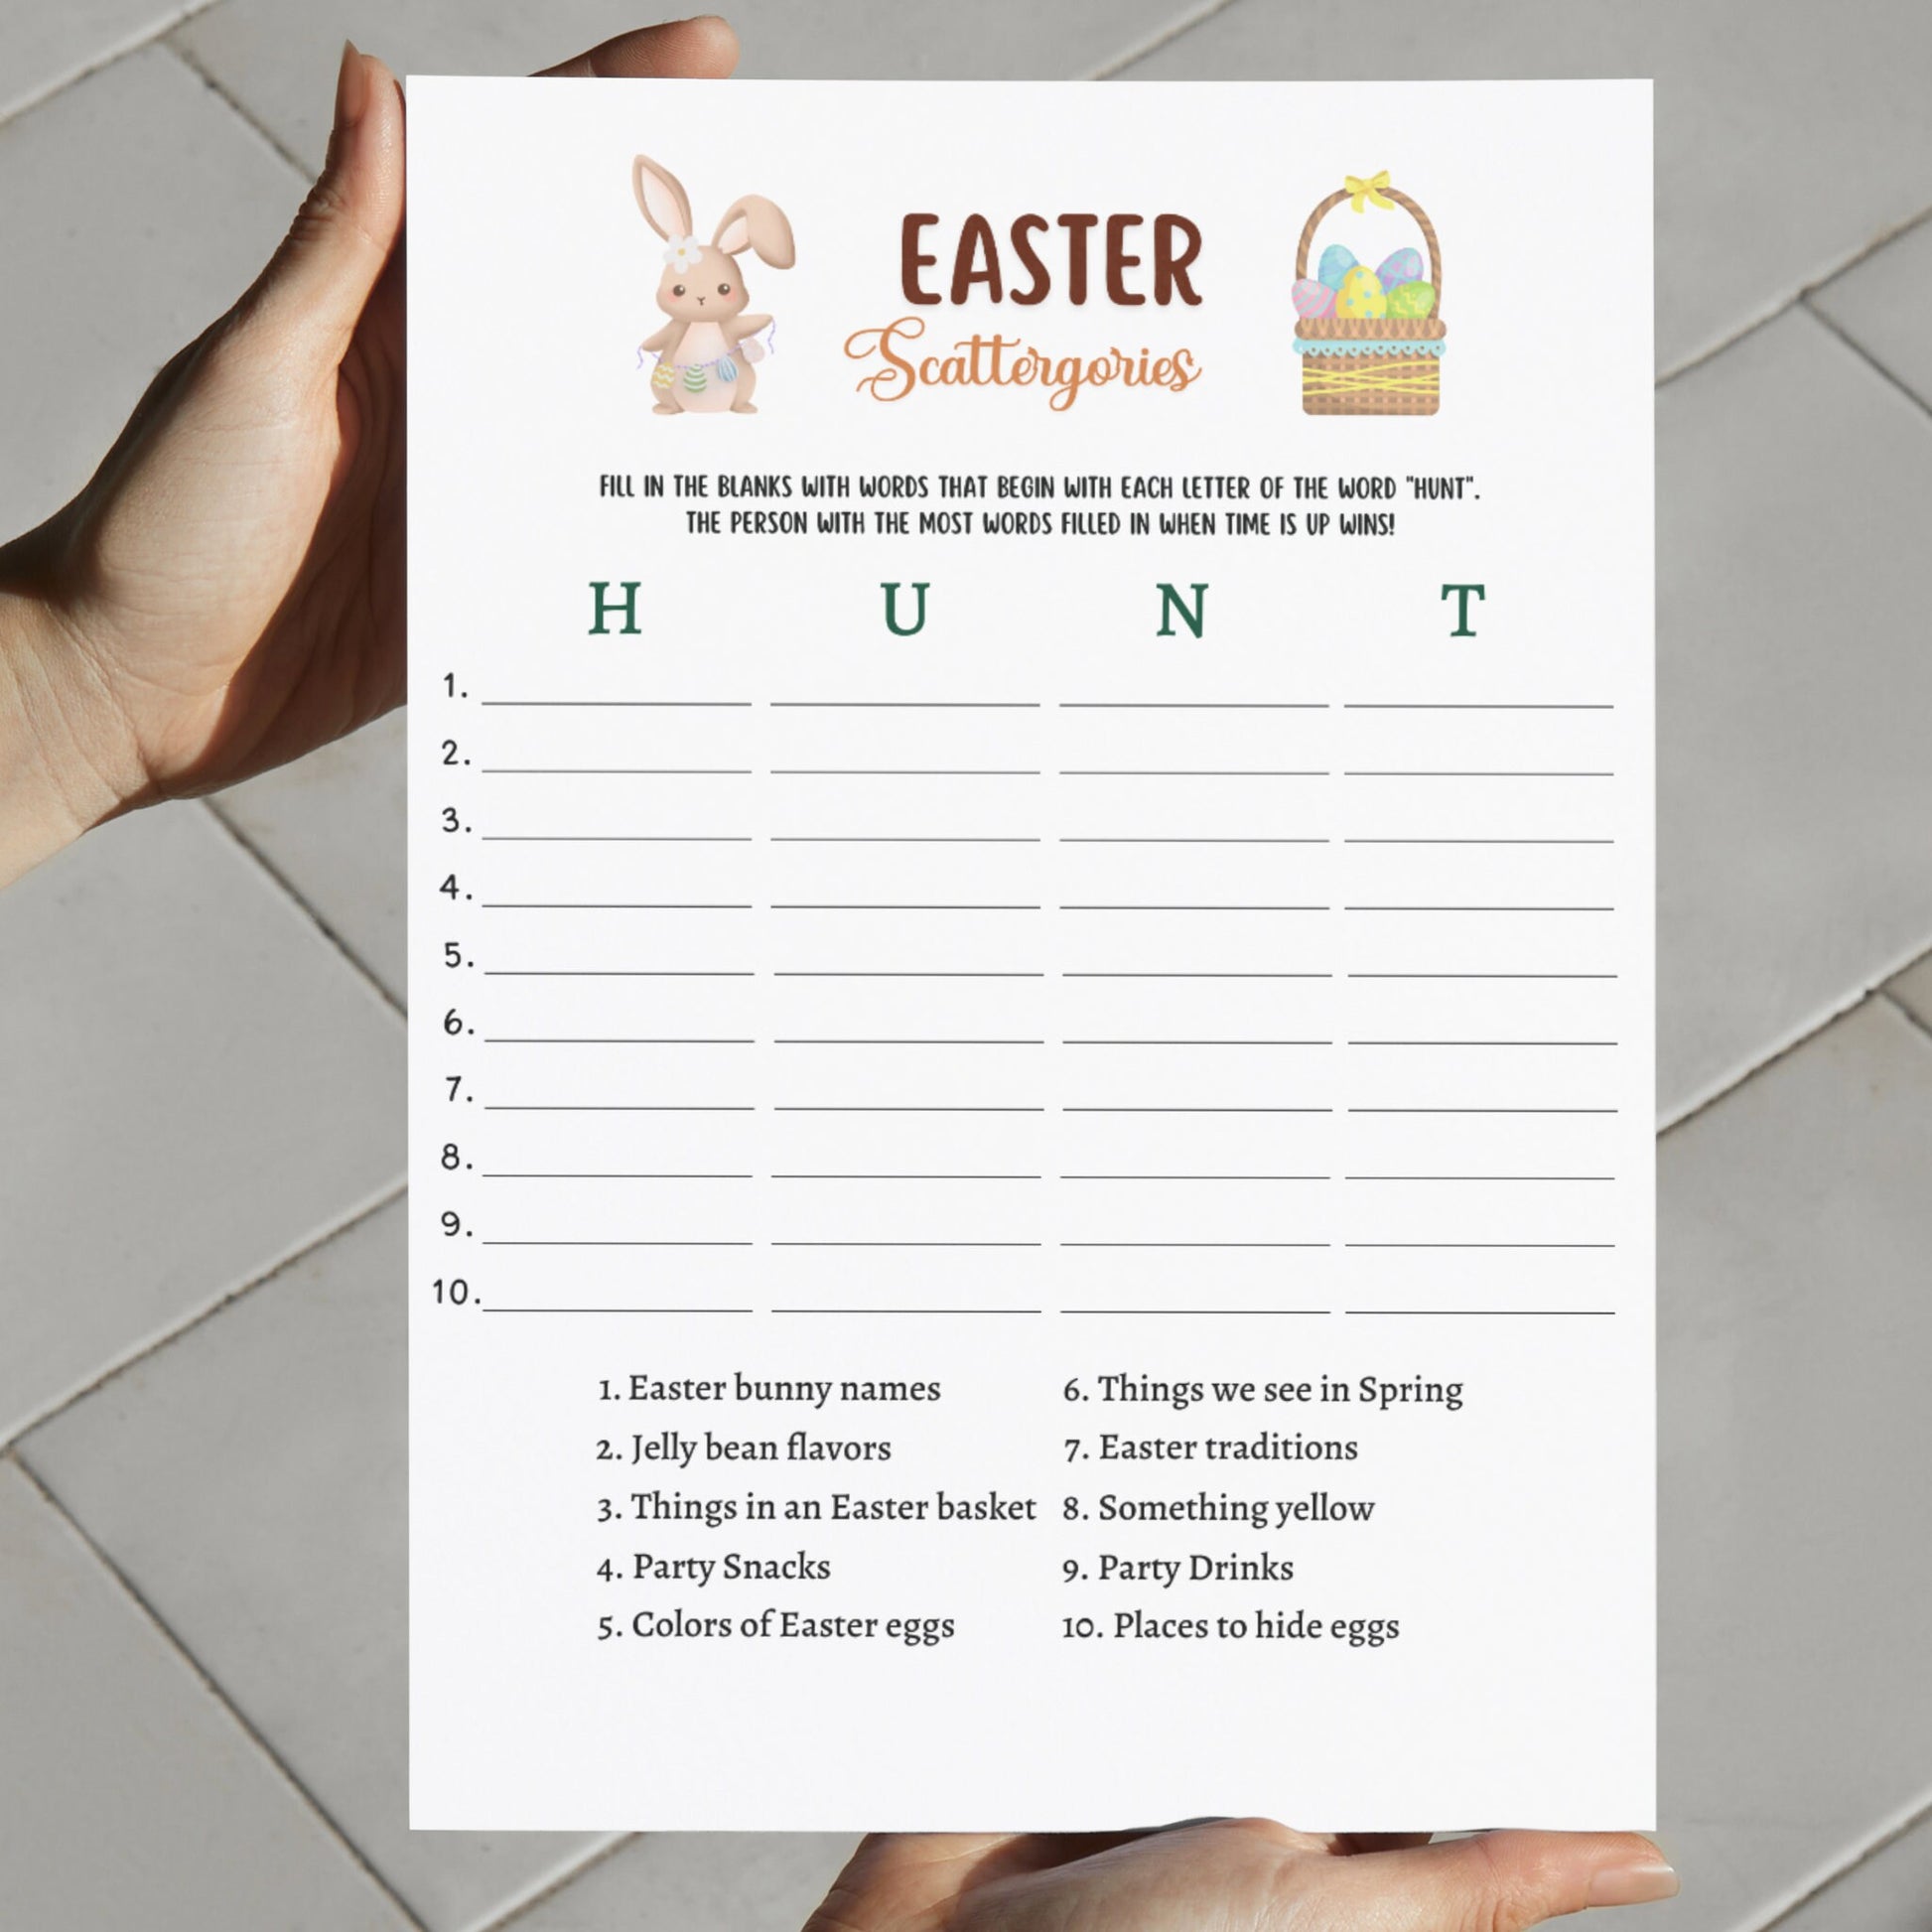 Easter Scattergories Game Printable, Easter Party Game, Easter Activity Kids, Easter Sunday Dinner Game Adults, Family Game, Classroom Game